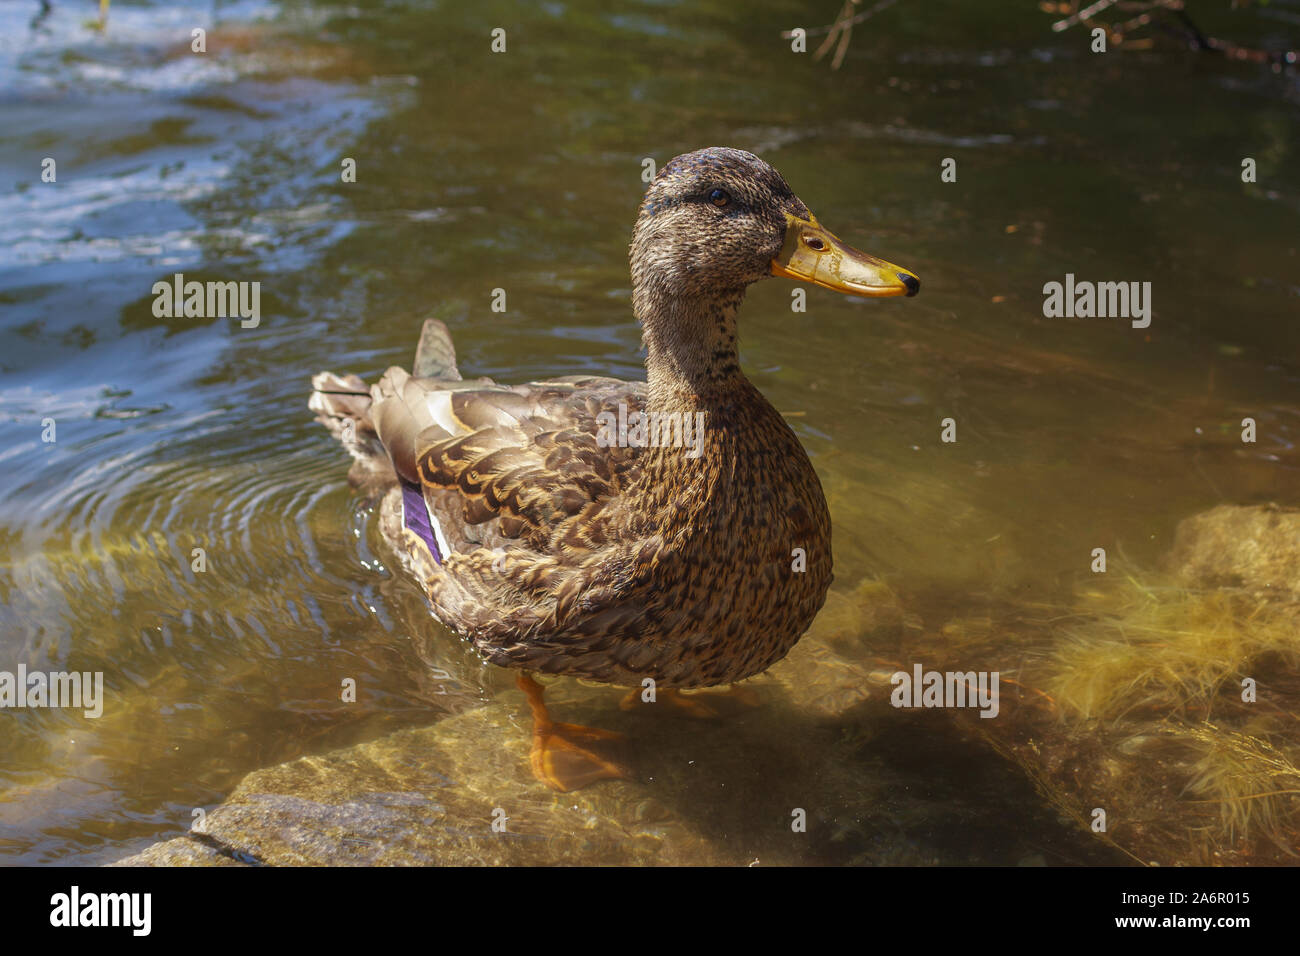 Funny dack standing in the water with purple wing. Stock Photo